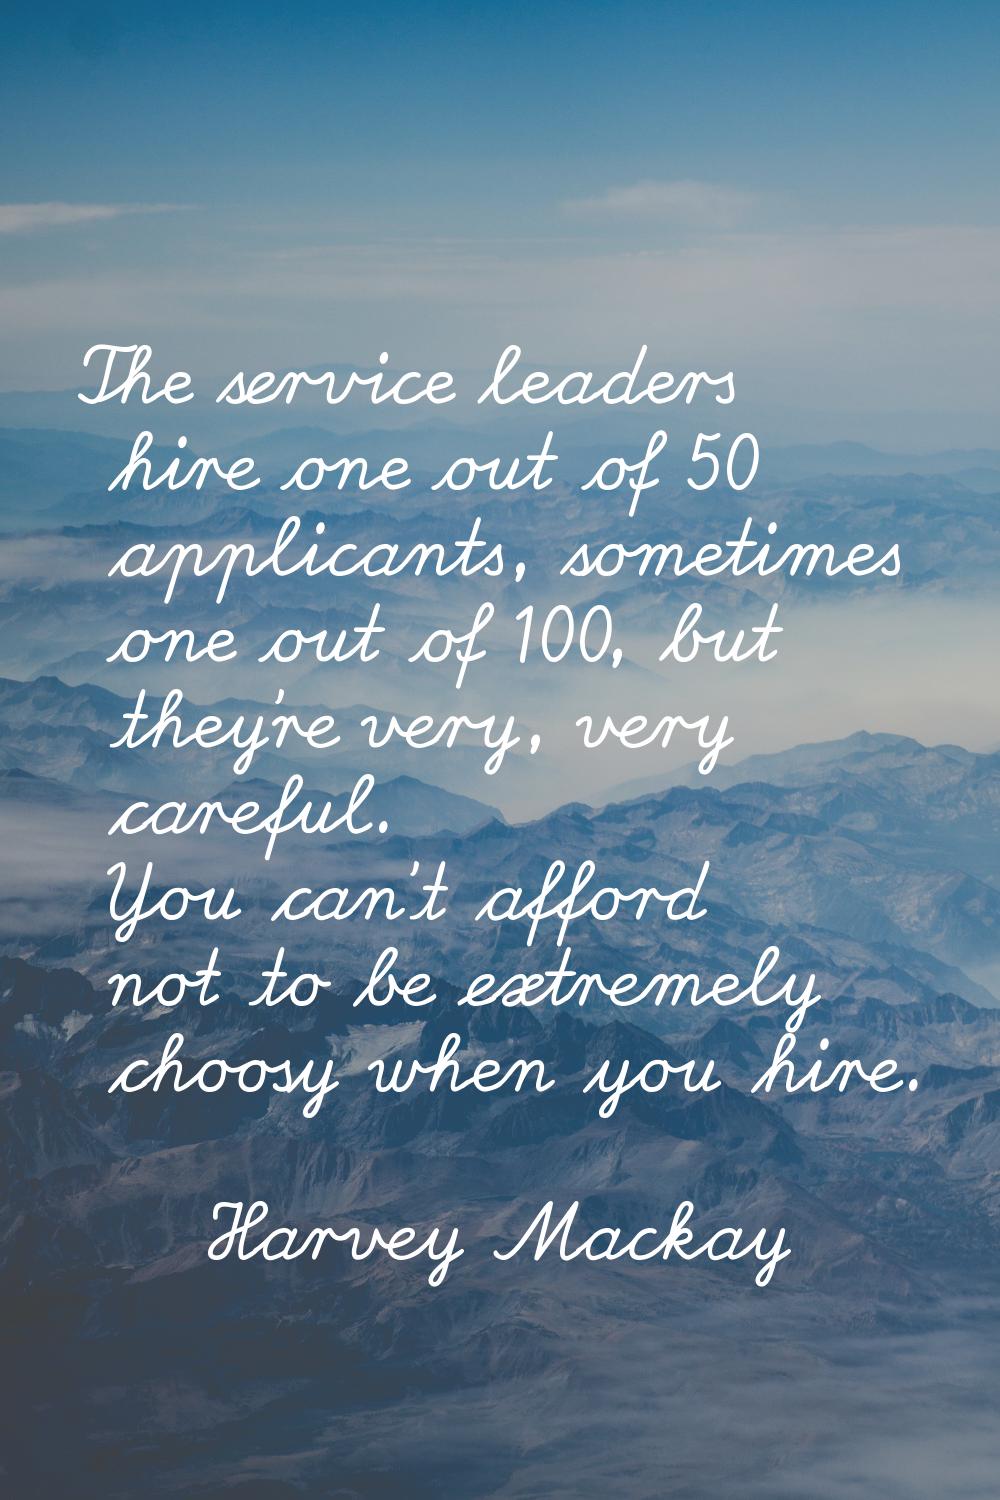 The service leaders hire one out of 50 applicants, sometimes one out of 100, but they're very, very